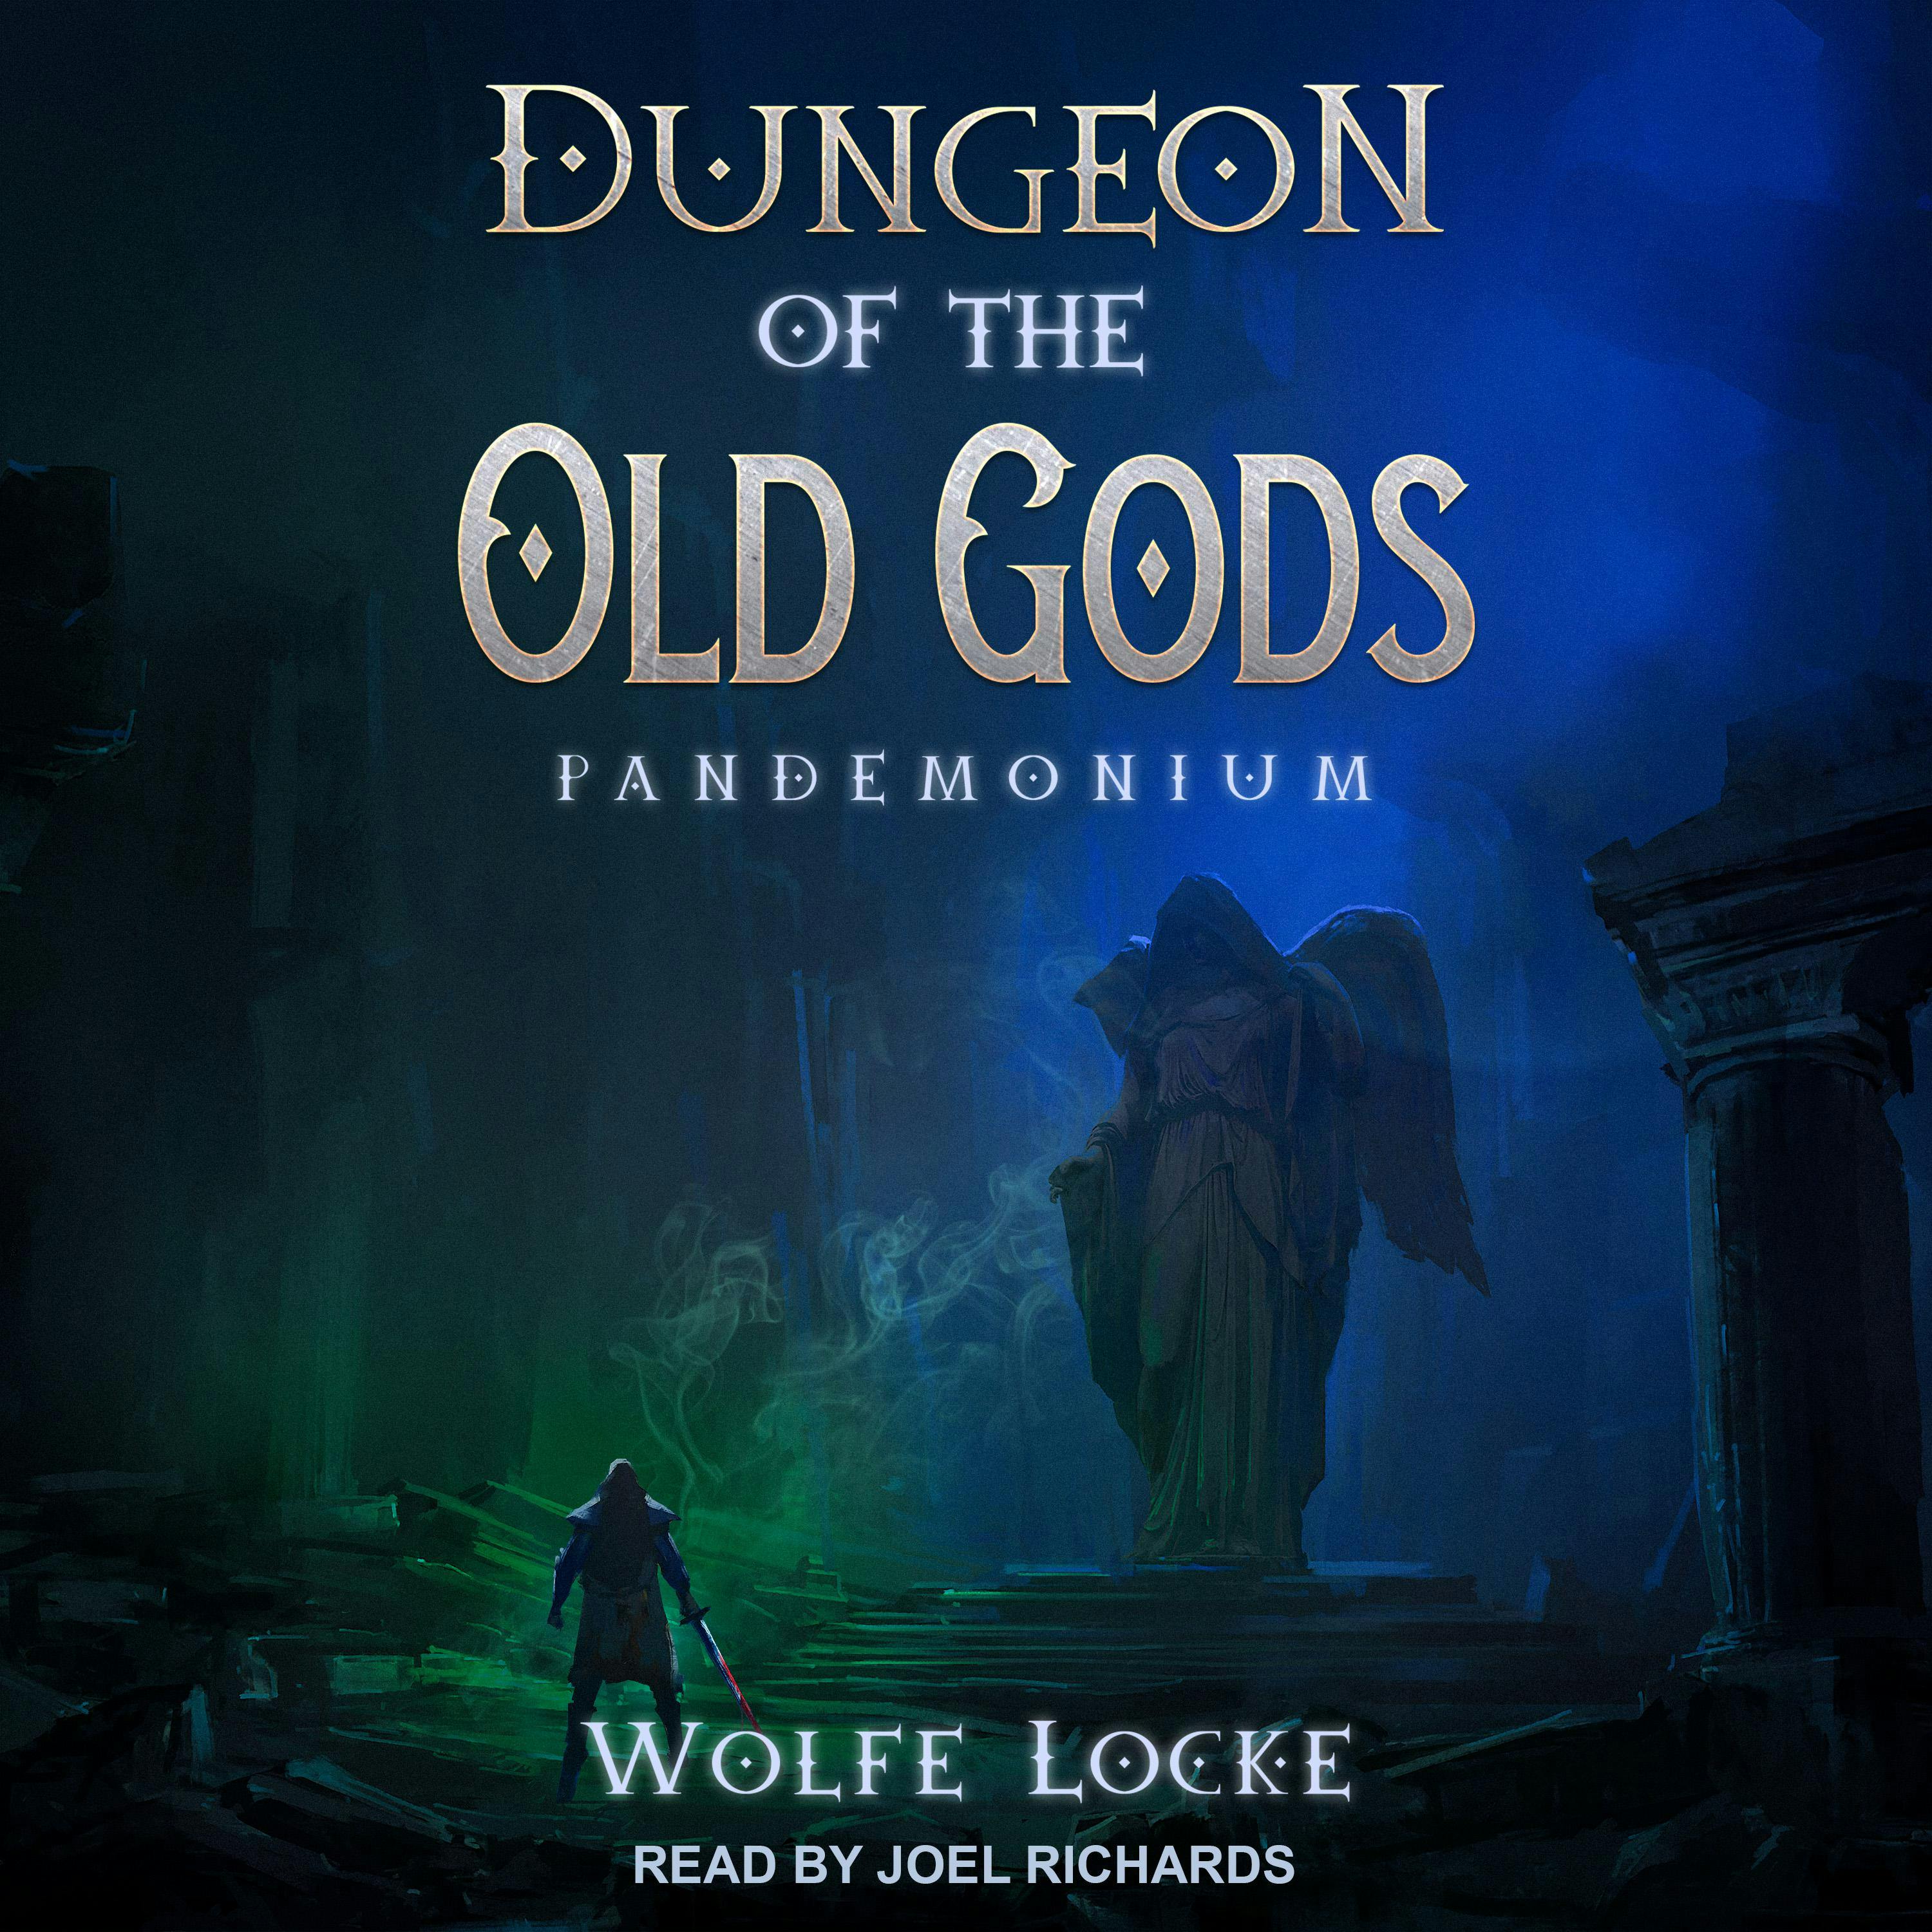 Dungeon of the Old Gods - undefined